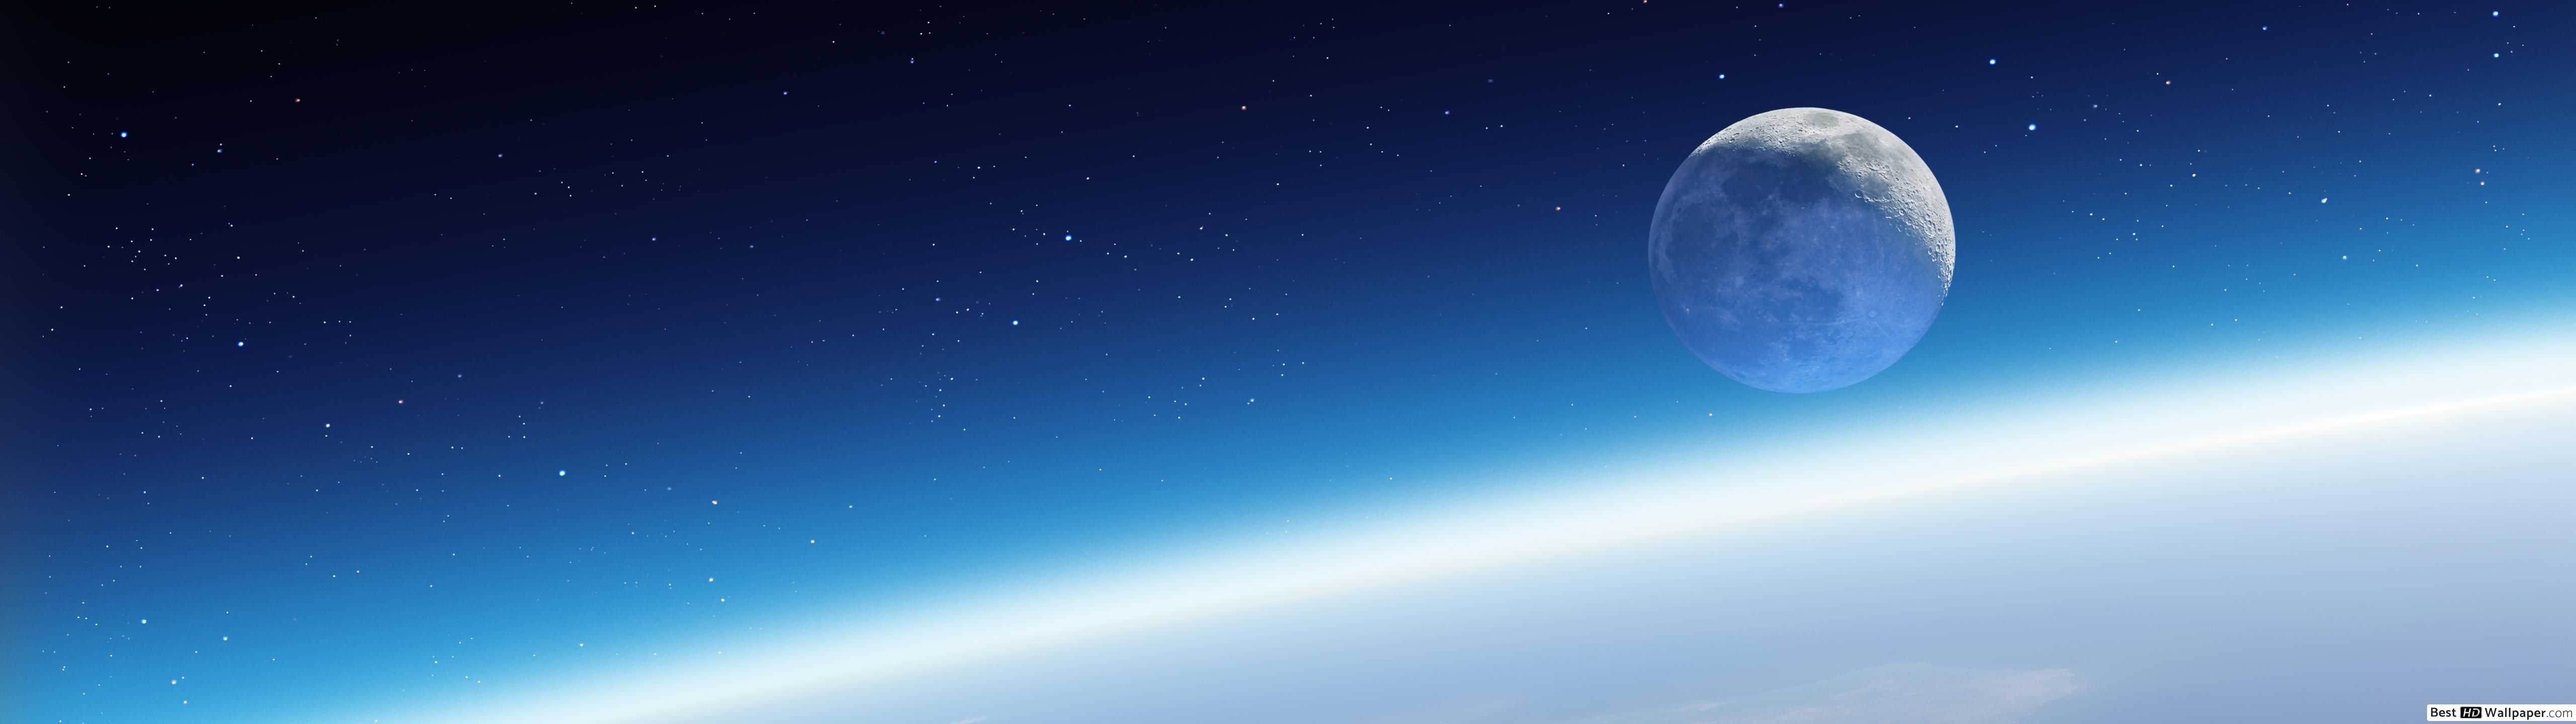 5120x1440 Wallpapers Space